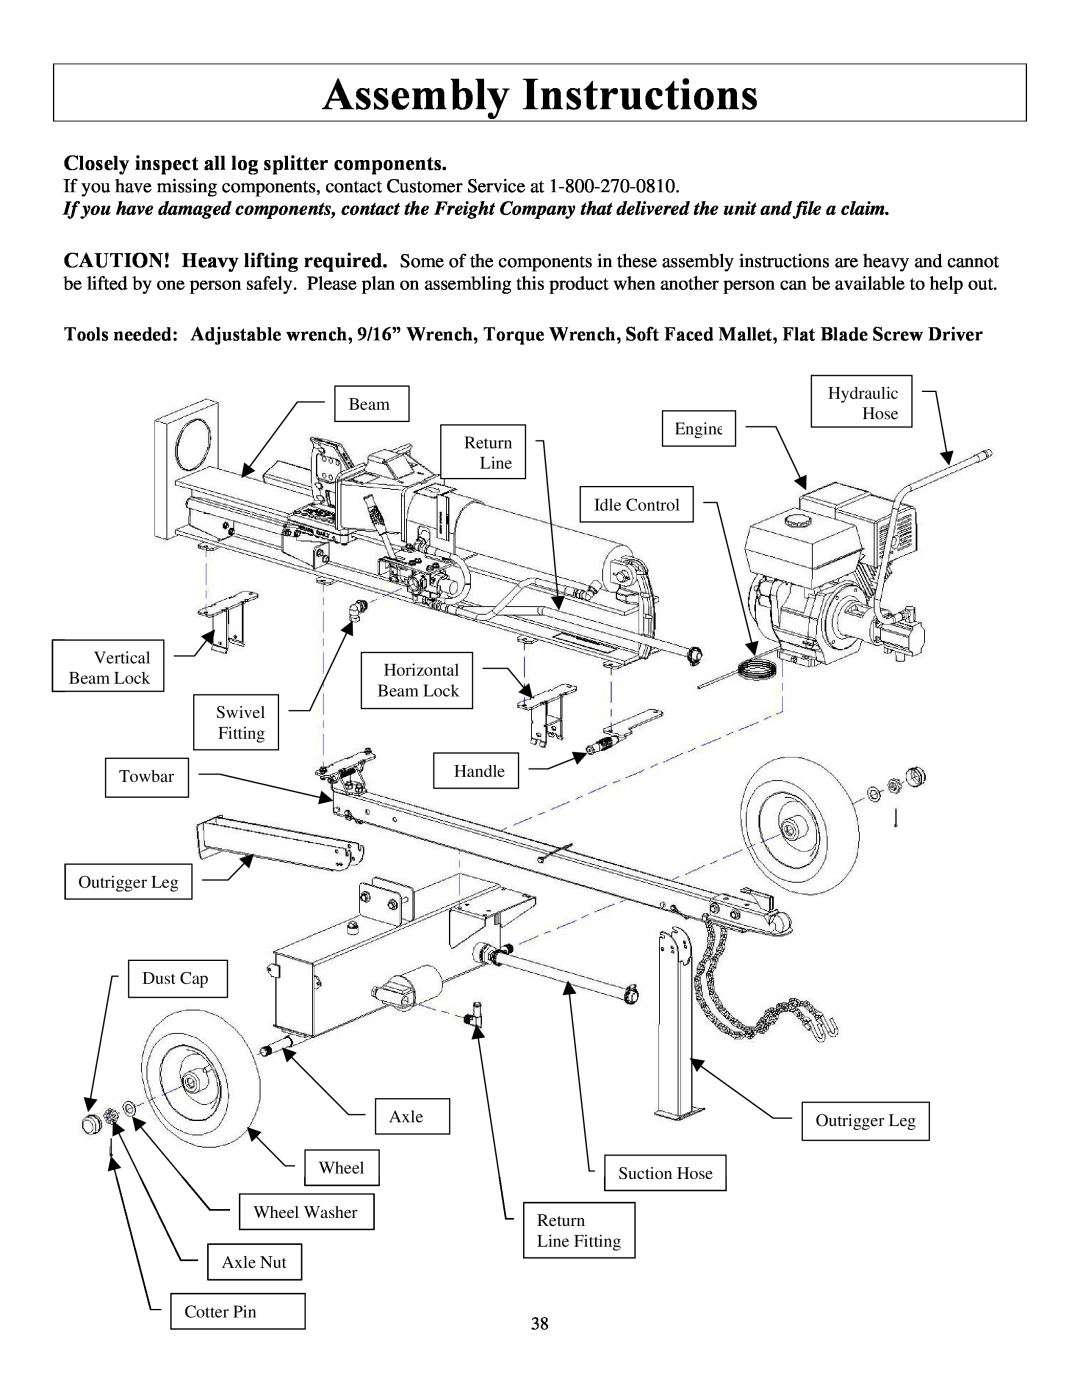 North Star M1108D owner manual Assembly Instructions, Closely inspect all log splitter components, Fitting, Handle, Towbar 